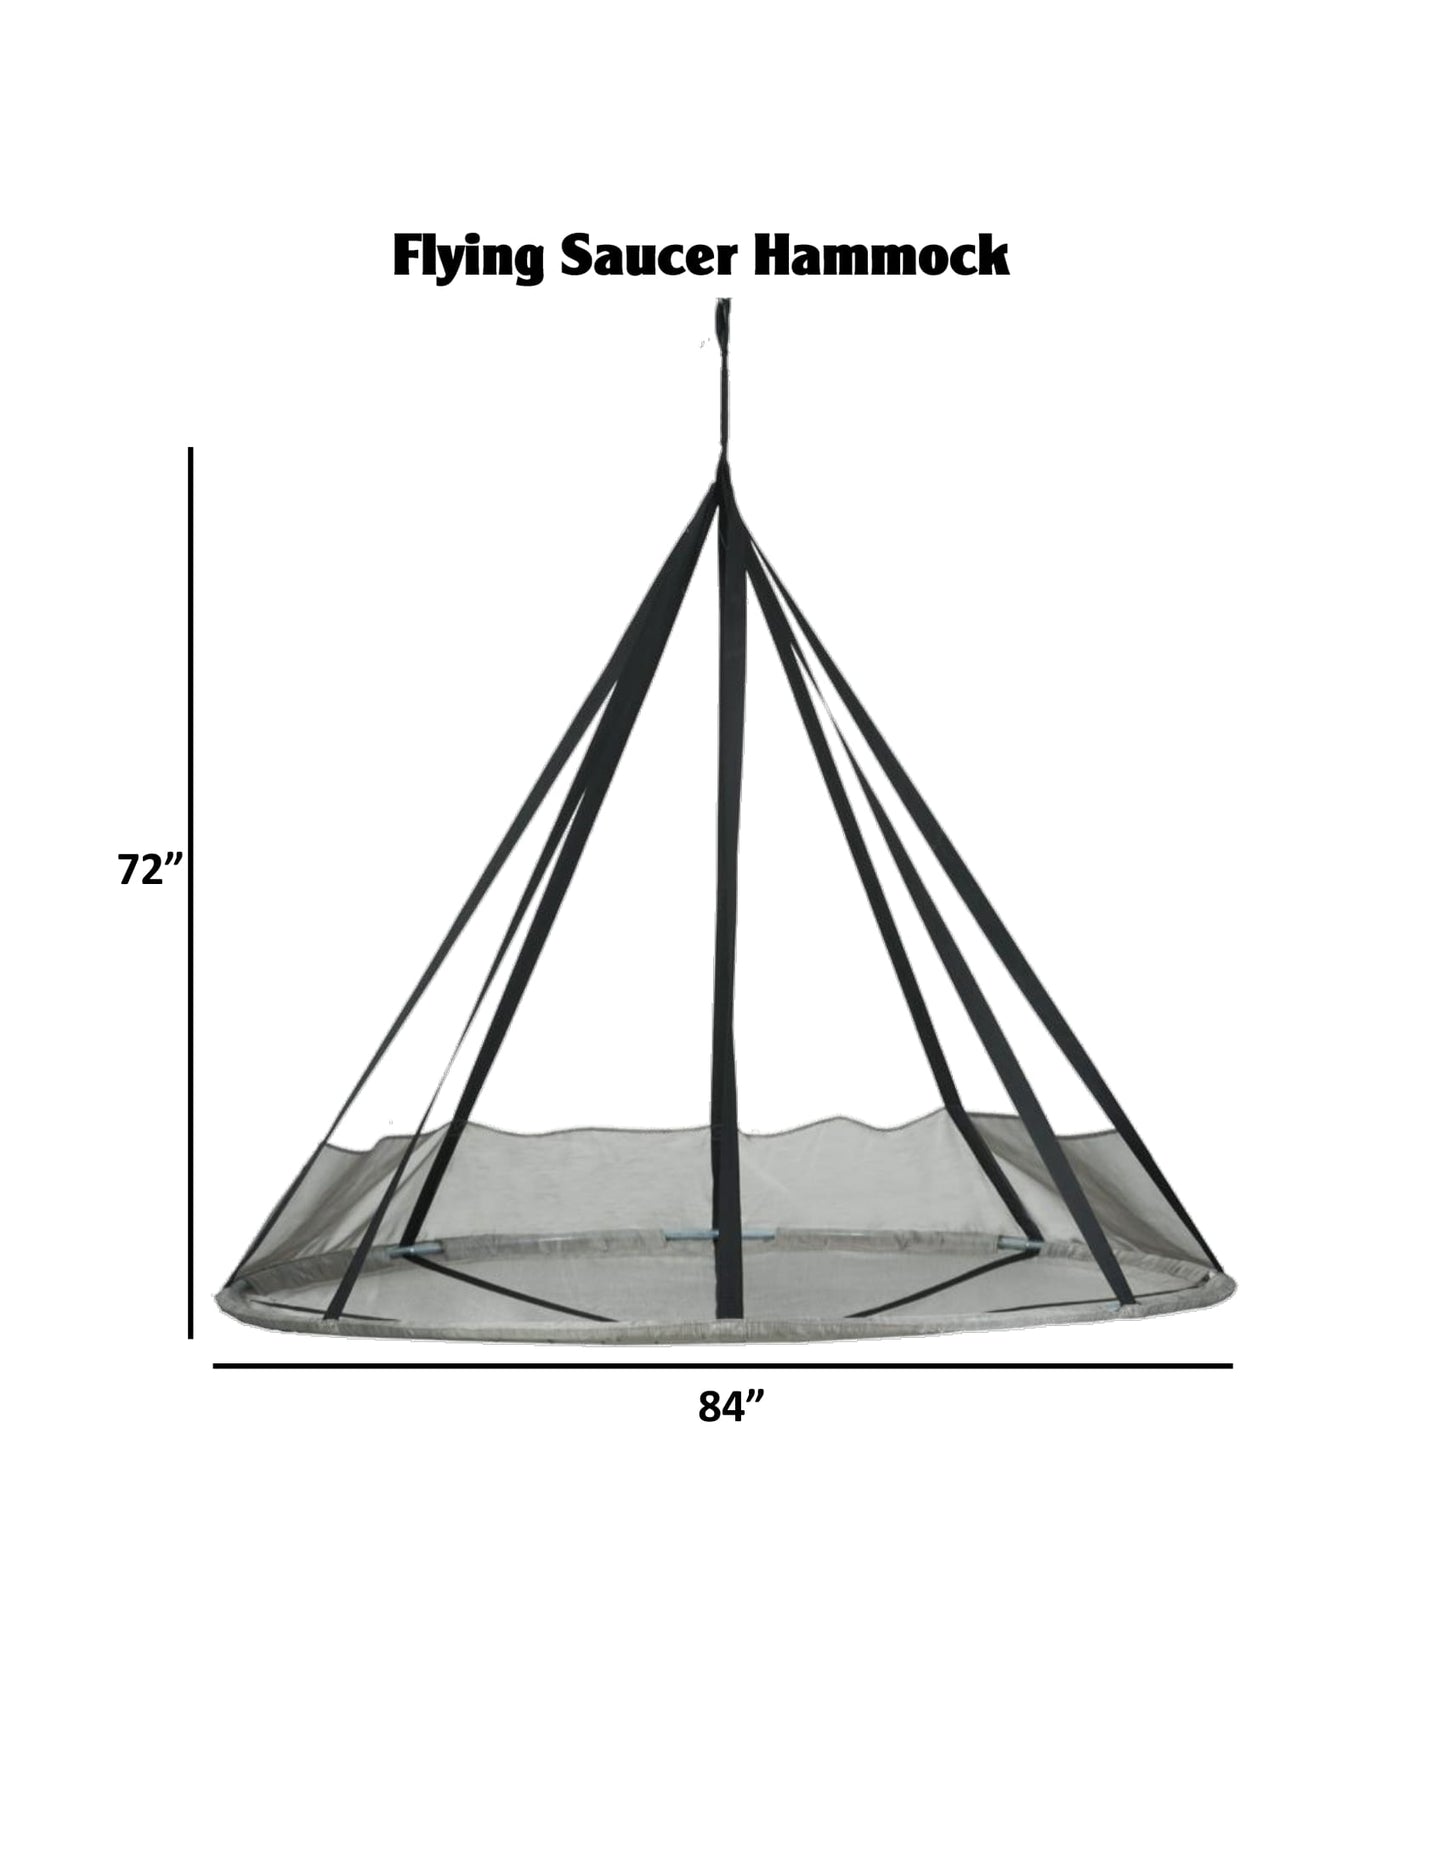 FlowerHouse Hanging Hammock Flying Saucer with Stand - dimension details